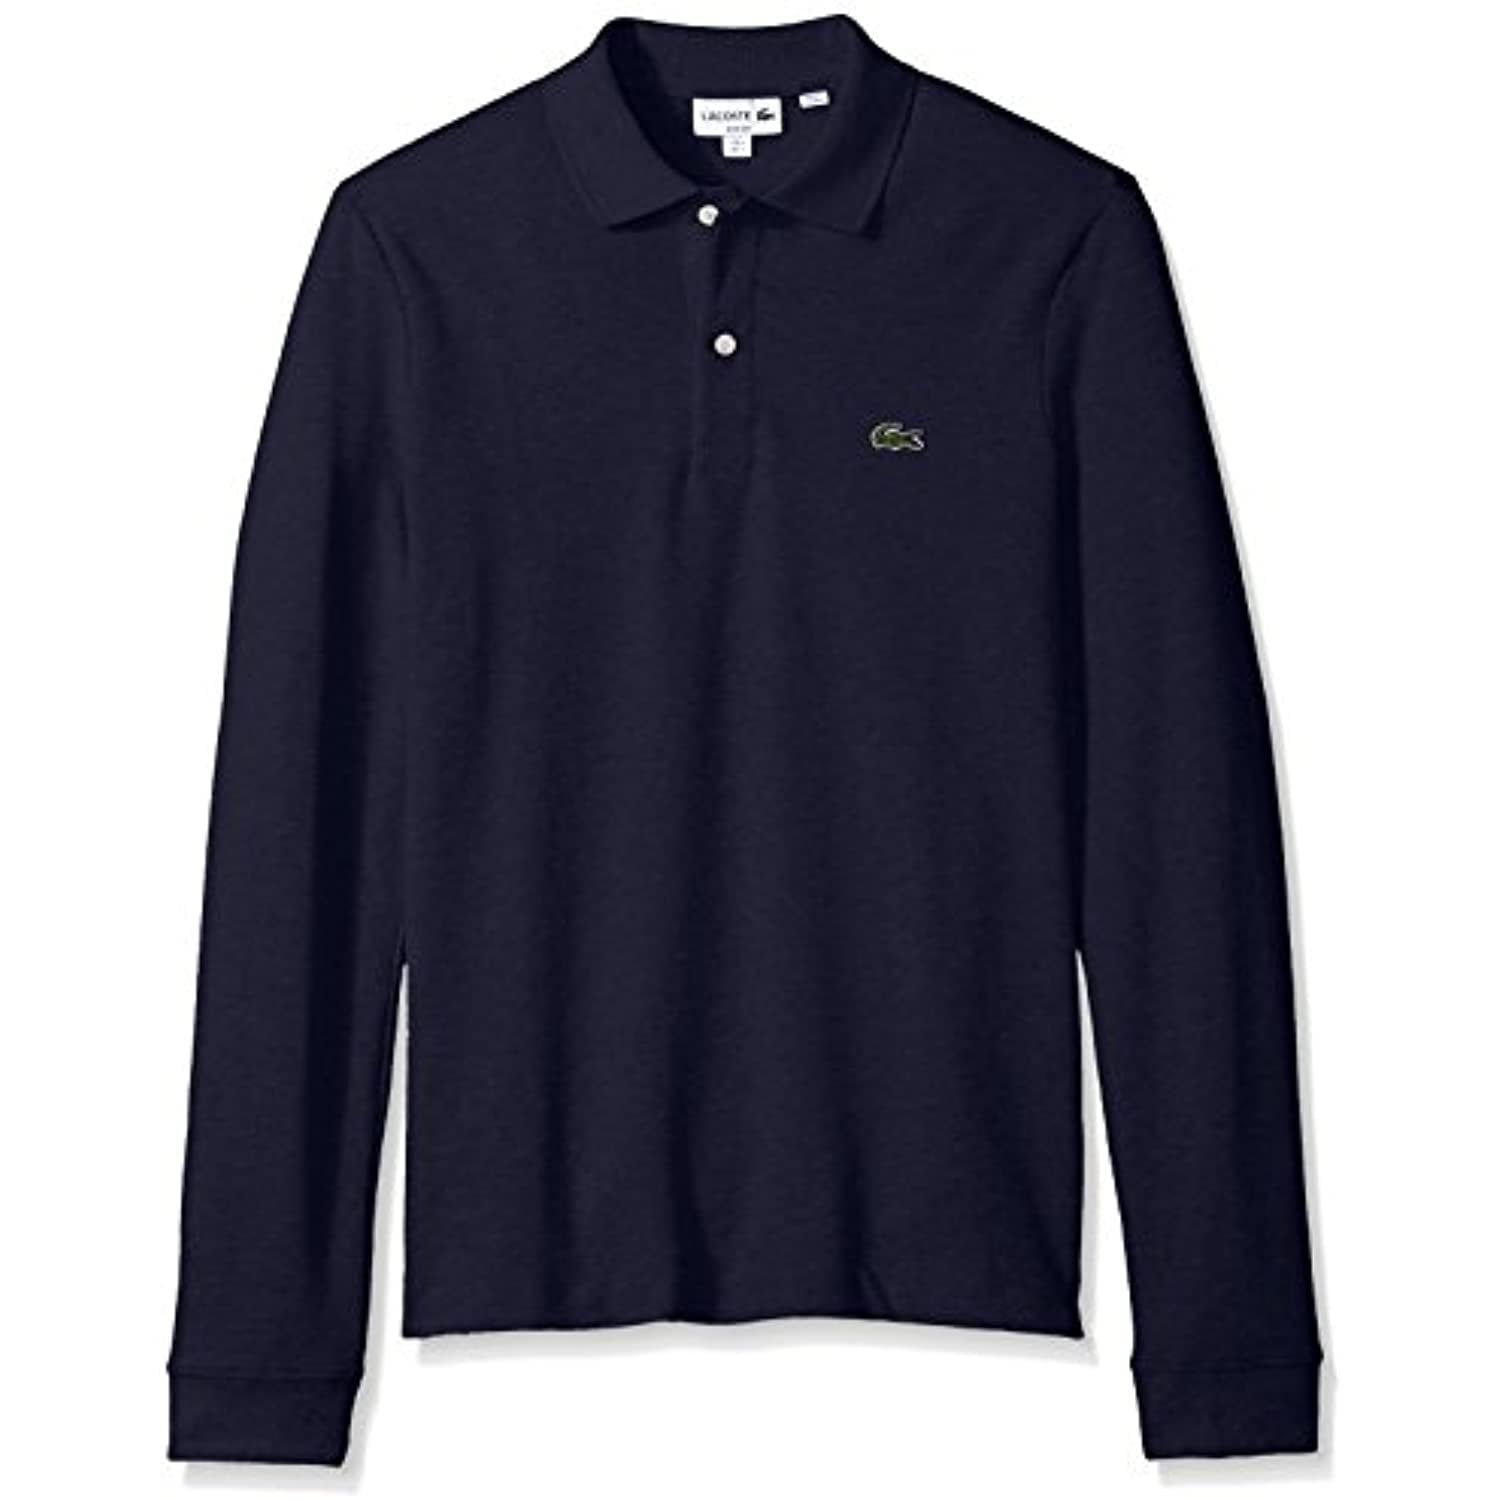 Pearly samlet set bifald Lacoste Men's Long Sleeve Classic Slim FIT Pique Polo, Navy Blue, X-Large -  Walmart.com